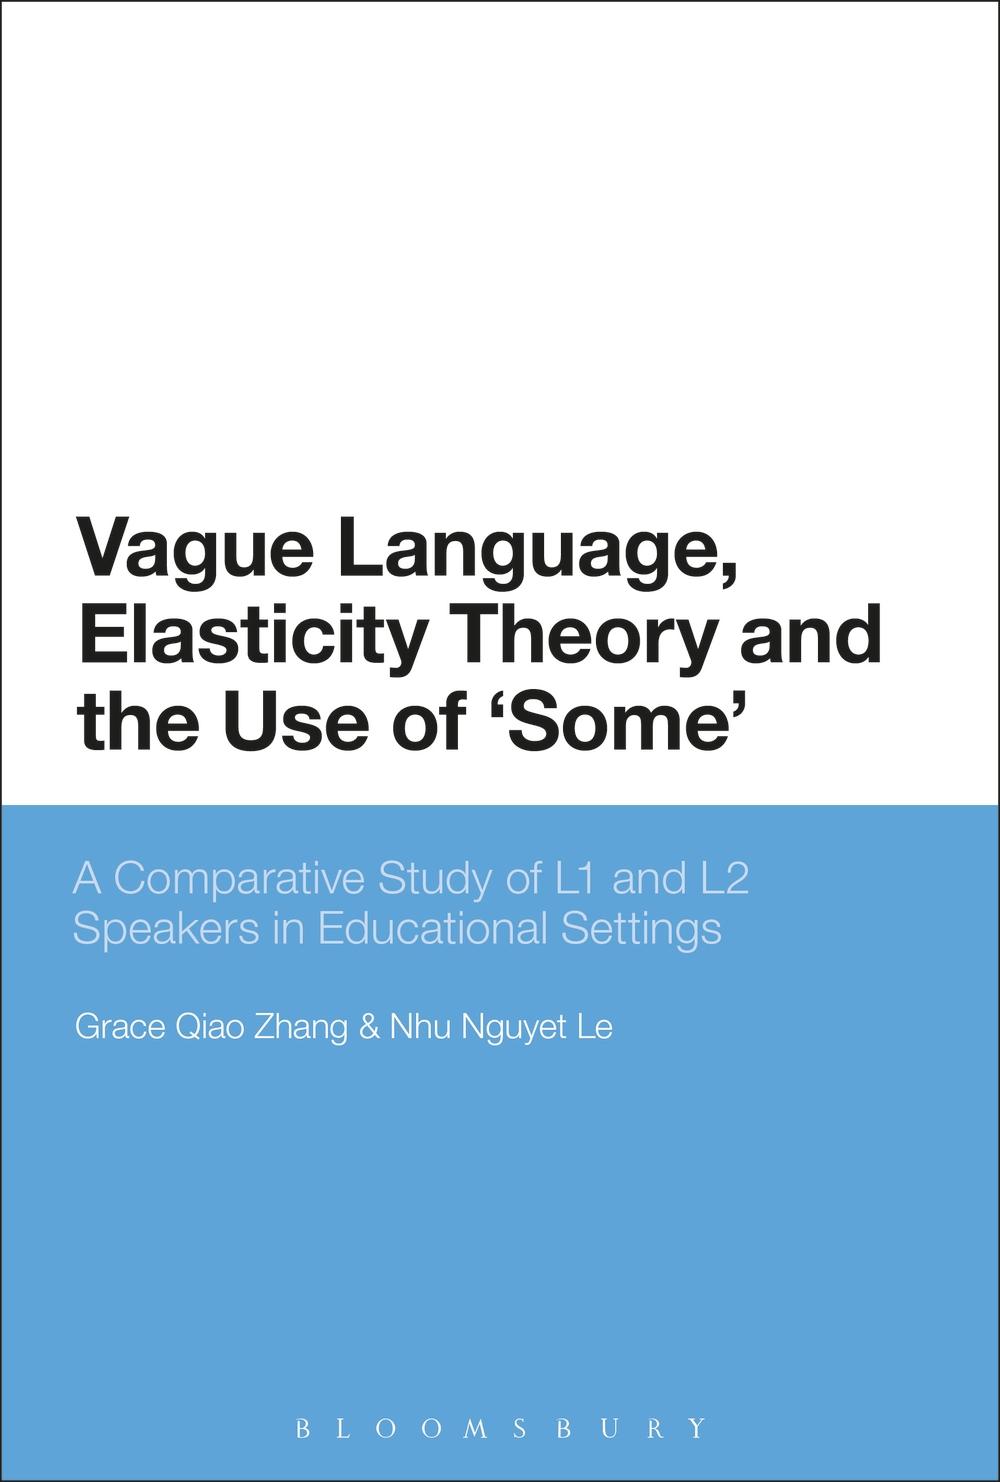 Vague Language, Elasticity Theory and the Use of 'Some' - Grace Qiao Zhang